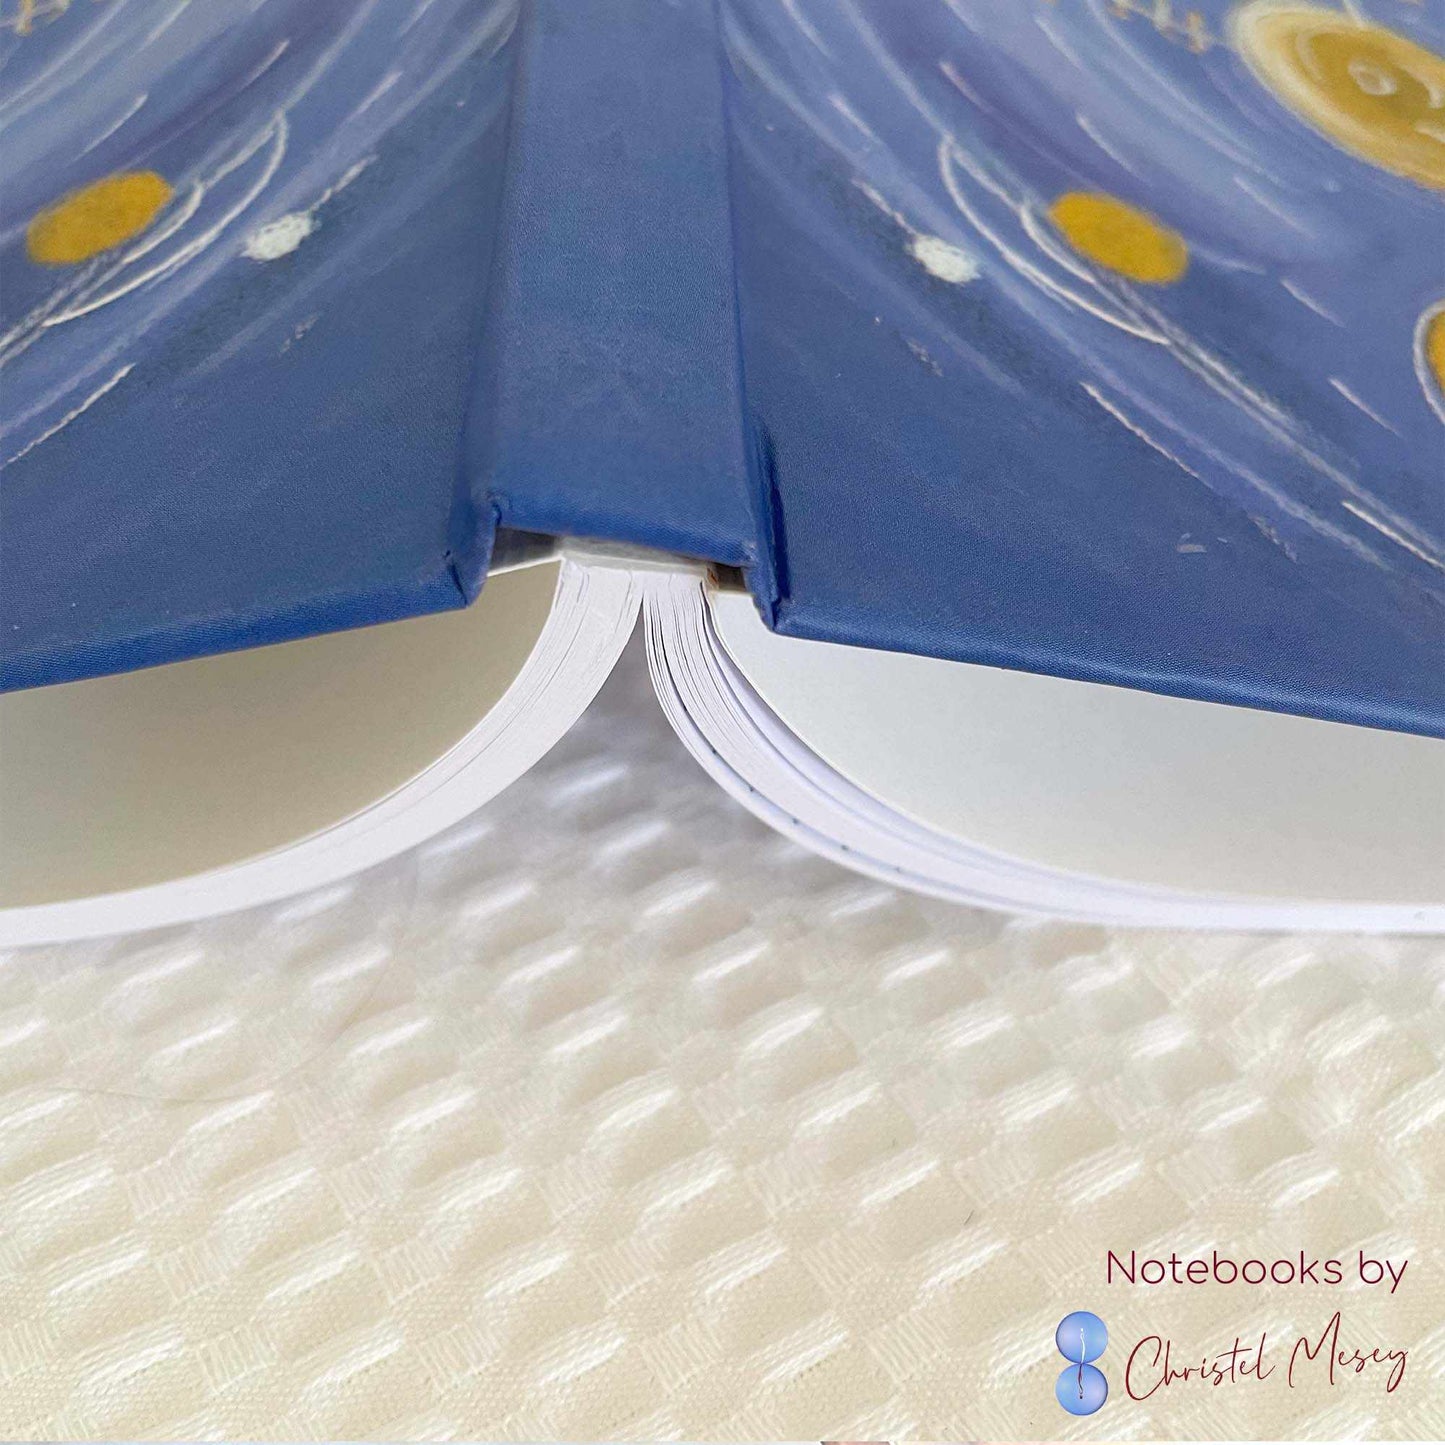 Centre - HardcoverNOTEBOOK - Get Back to Centre - Hardcover with Dotted pages